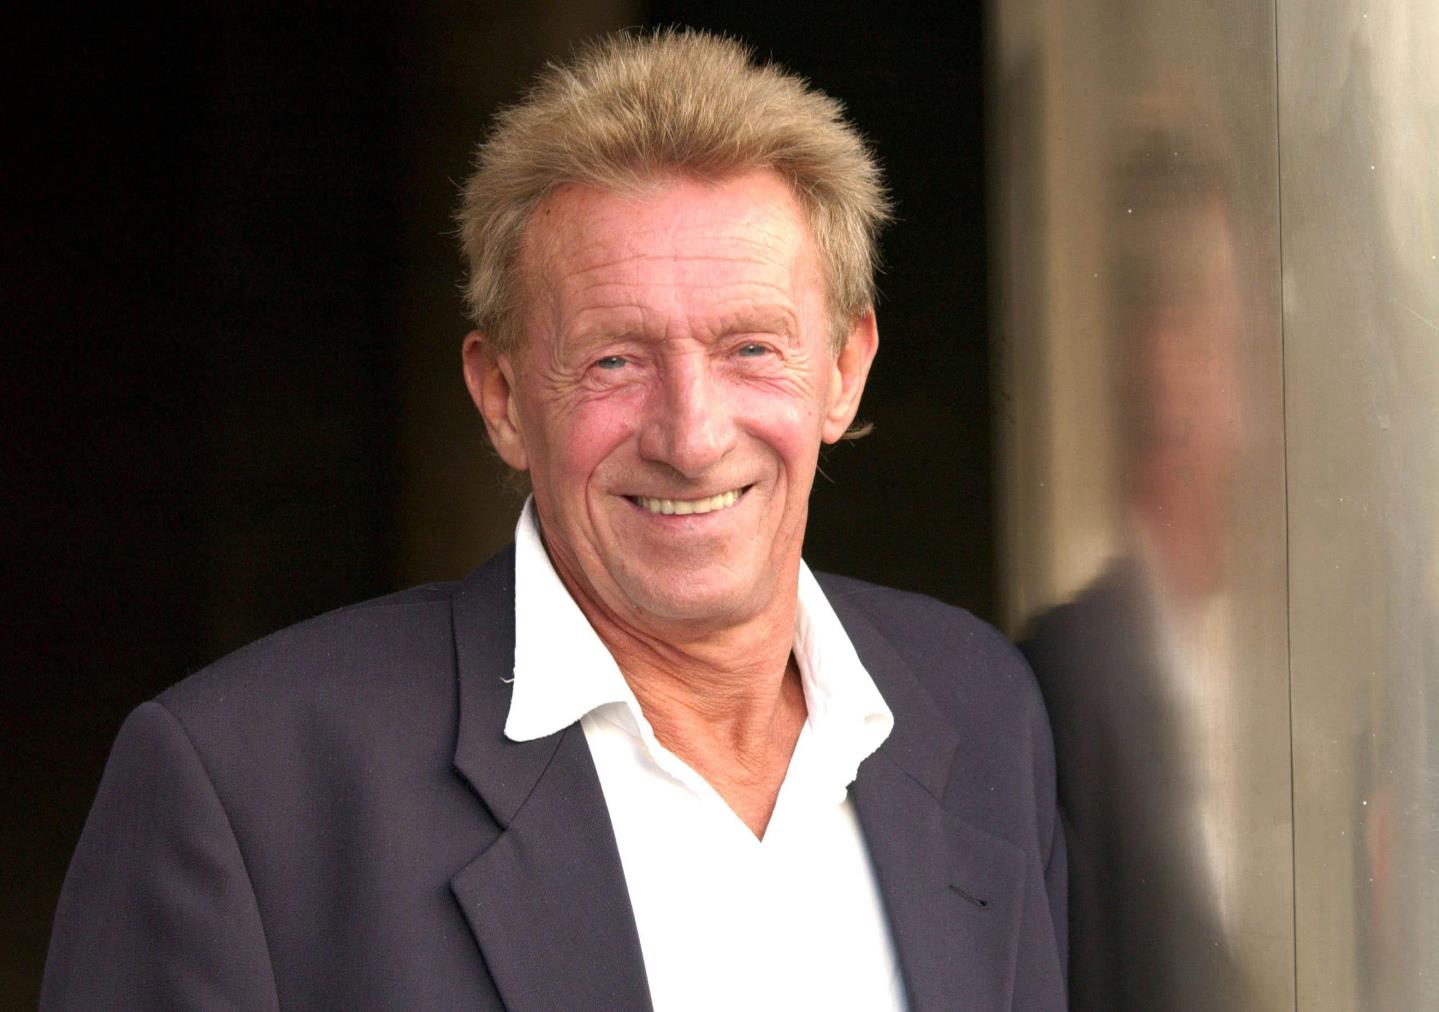 Denis Law has spoken about the links between dementia and sport